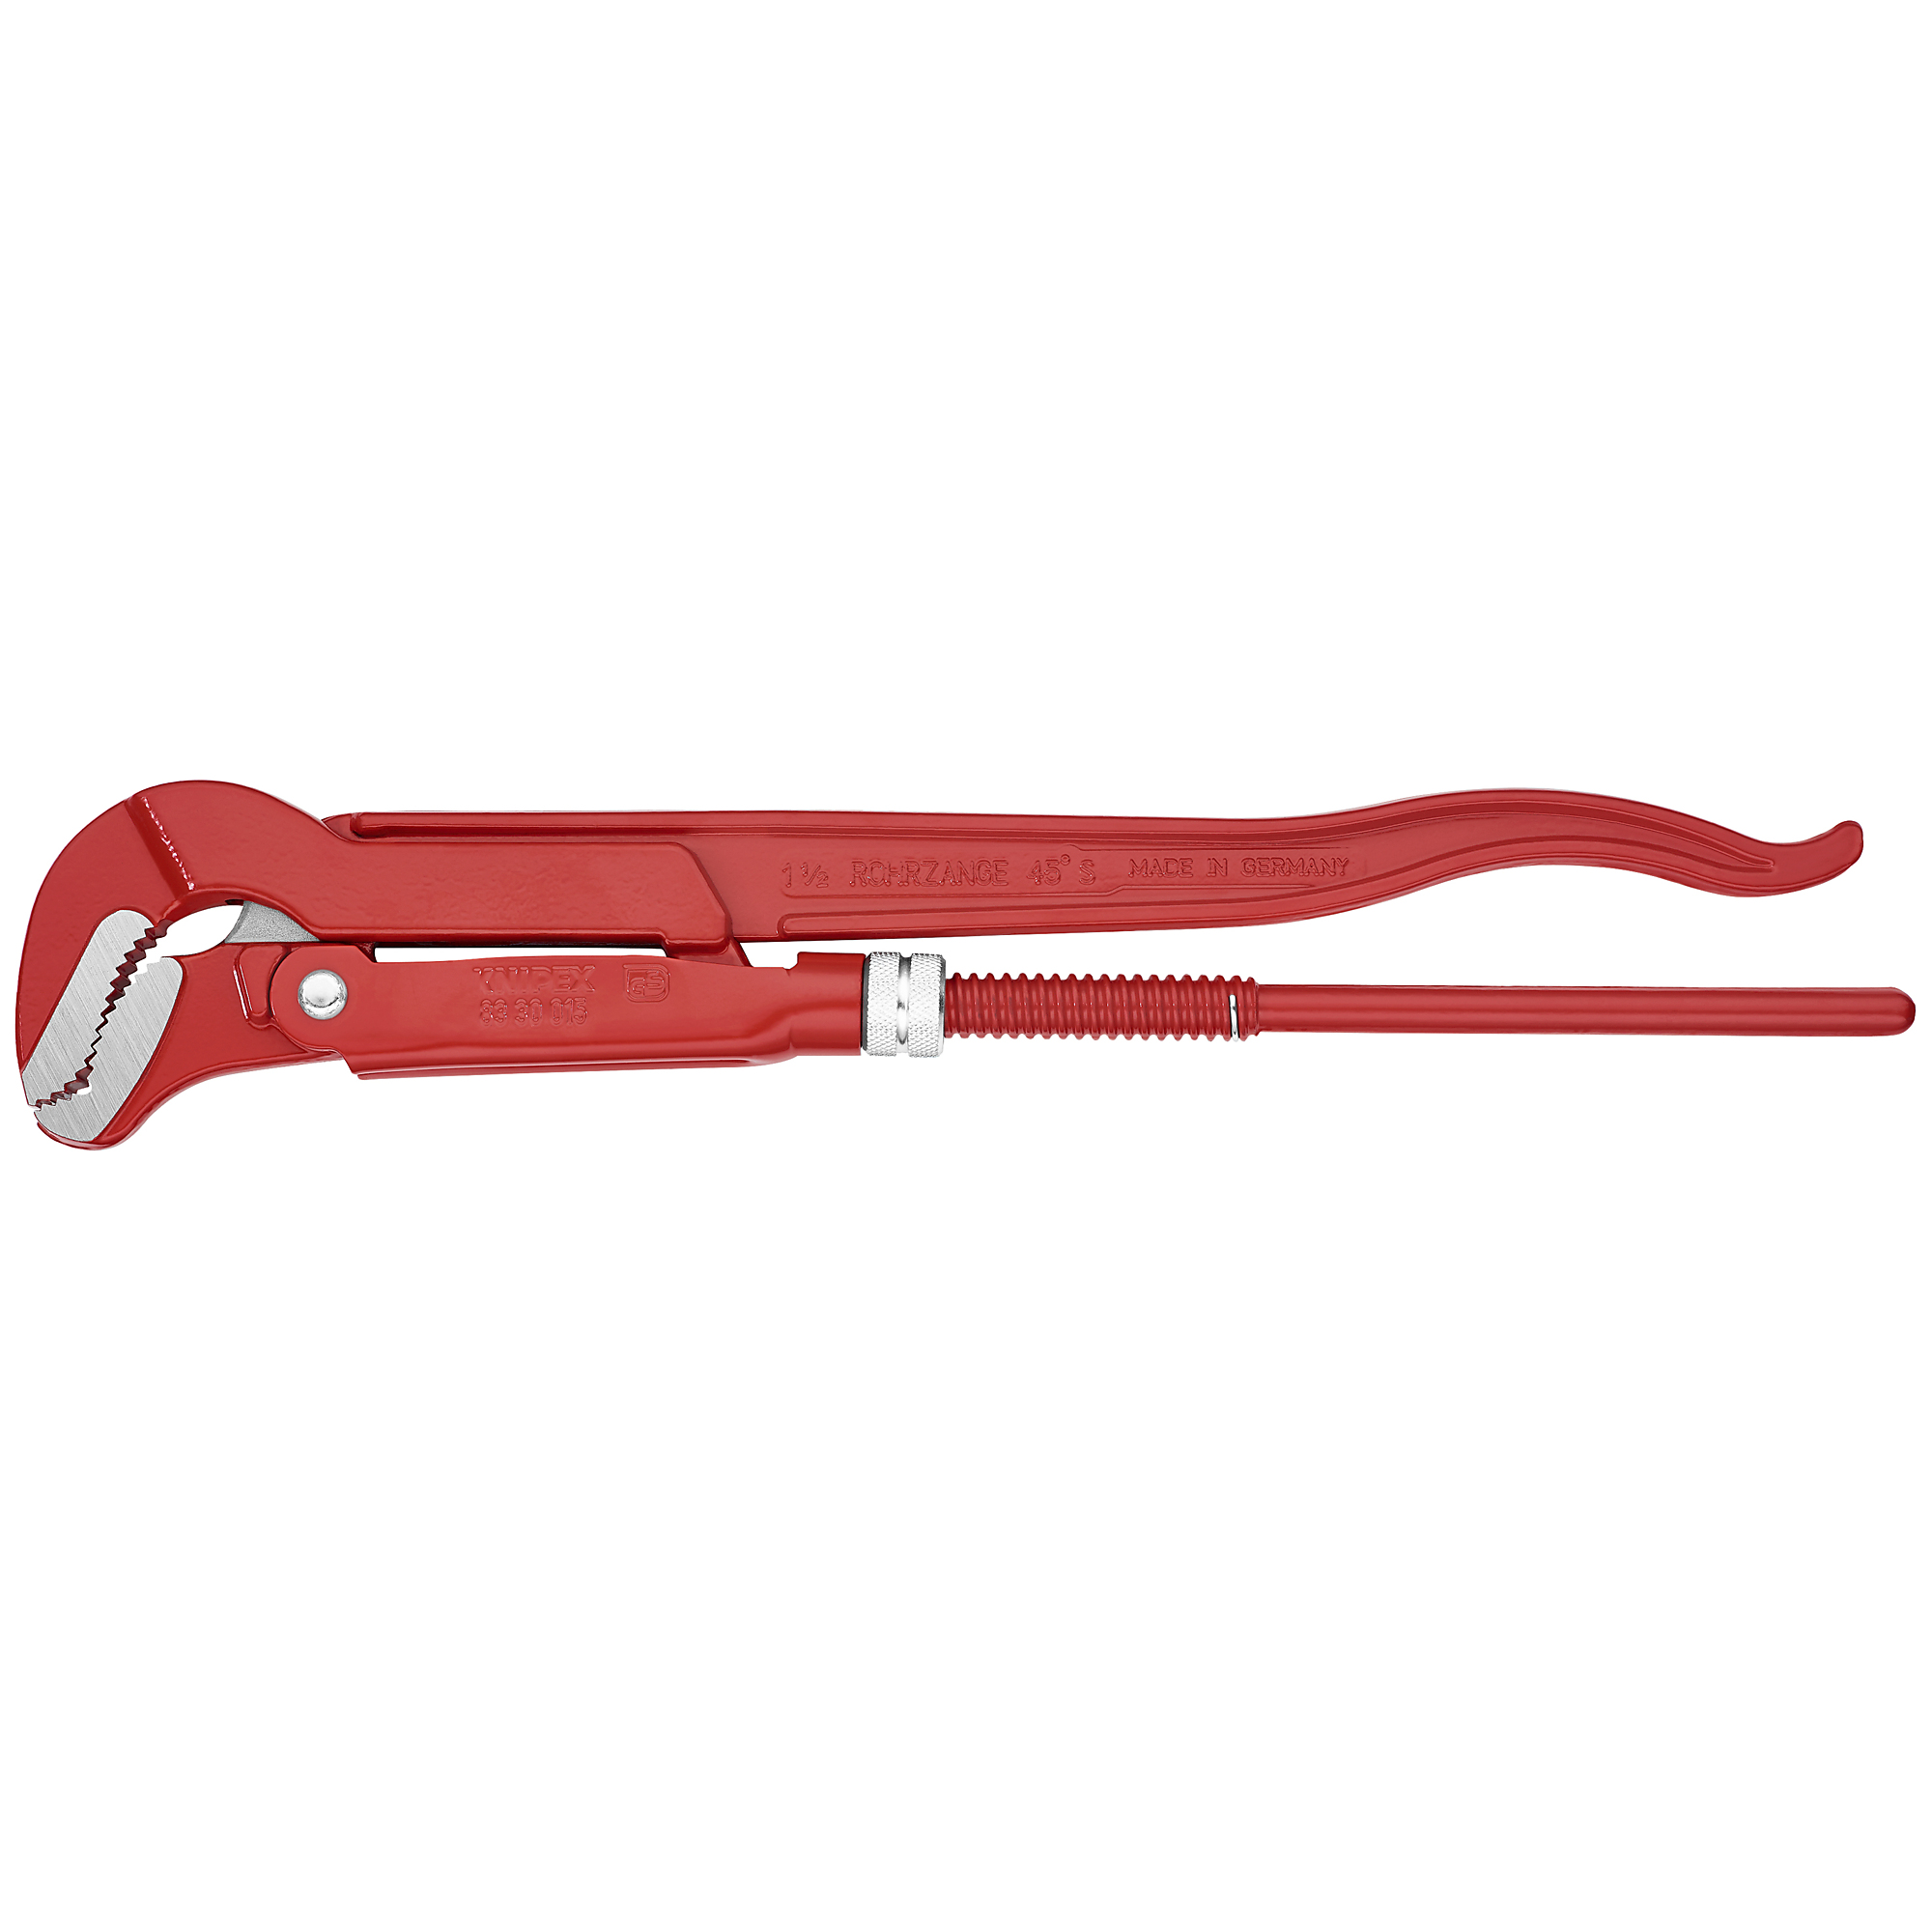 KNIPEX, Swedish Pipe Wrench-S-Type, 16.5Inch, Pieces (qty.) 1 Material Steel, Jaw Capacity 2.046875 in, Model 83 30 015